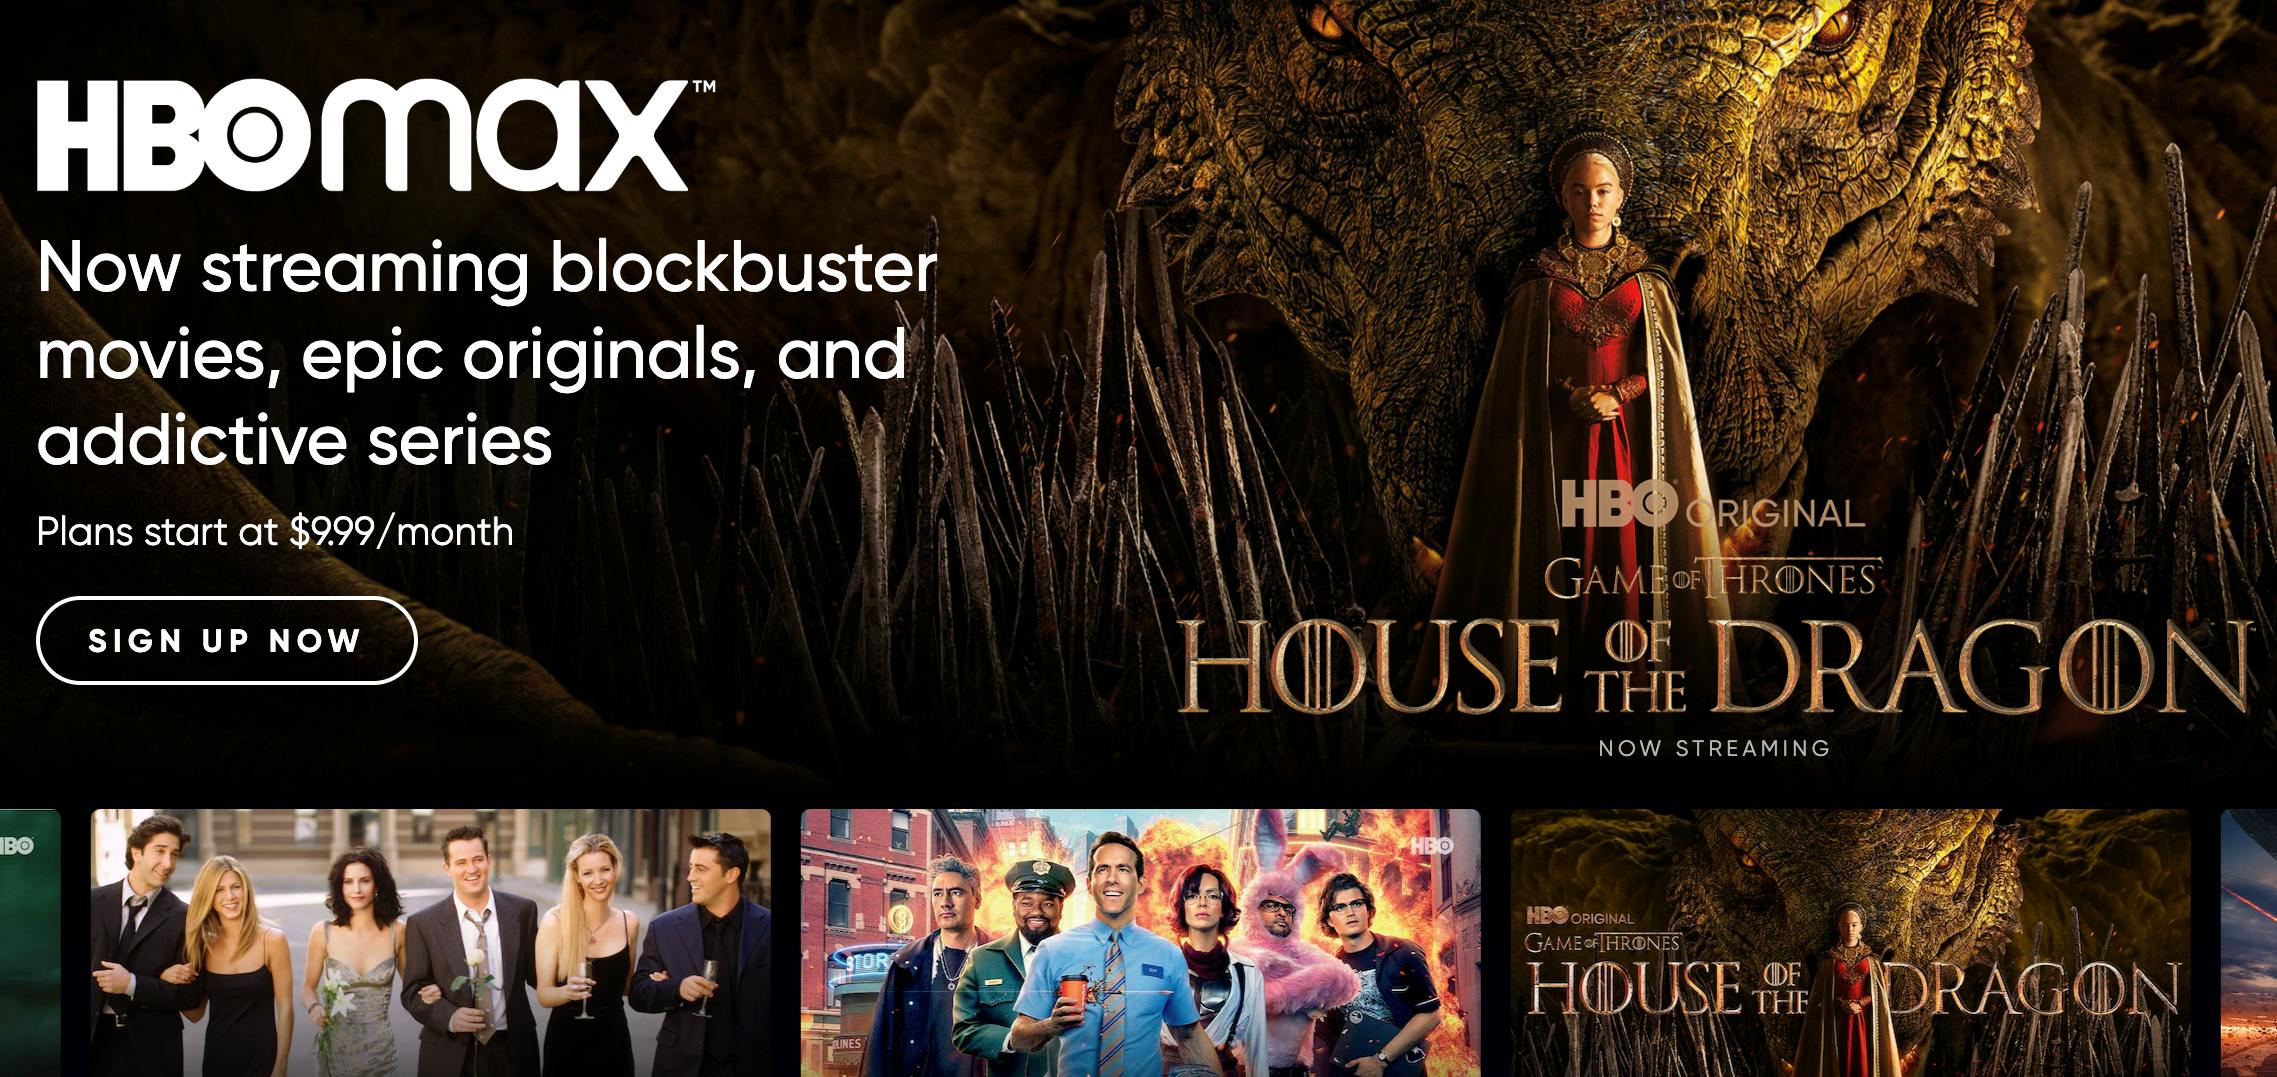 A screenshot of the HBO max home page featuring House of the Dragon 